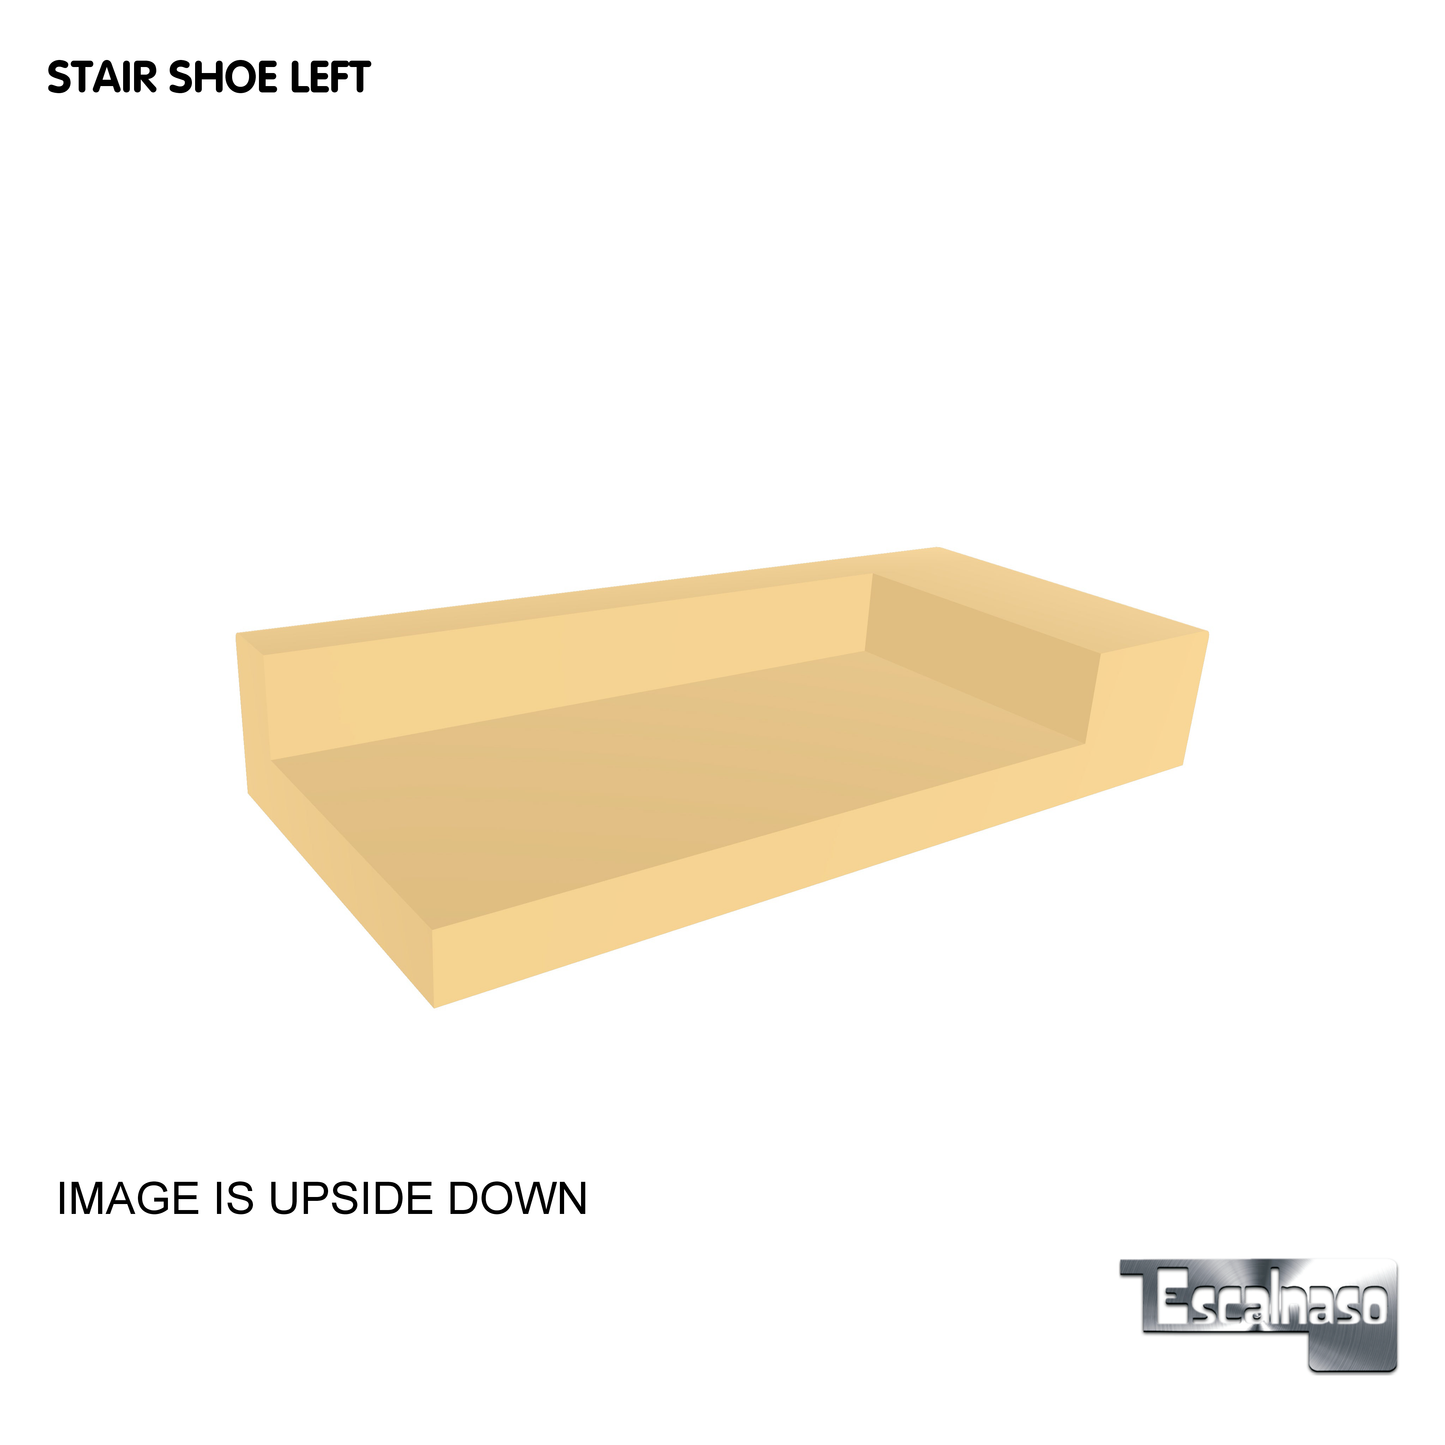 (18101) SMALL STAIR SHOE LEFT